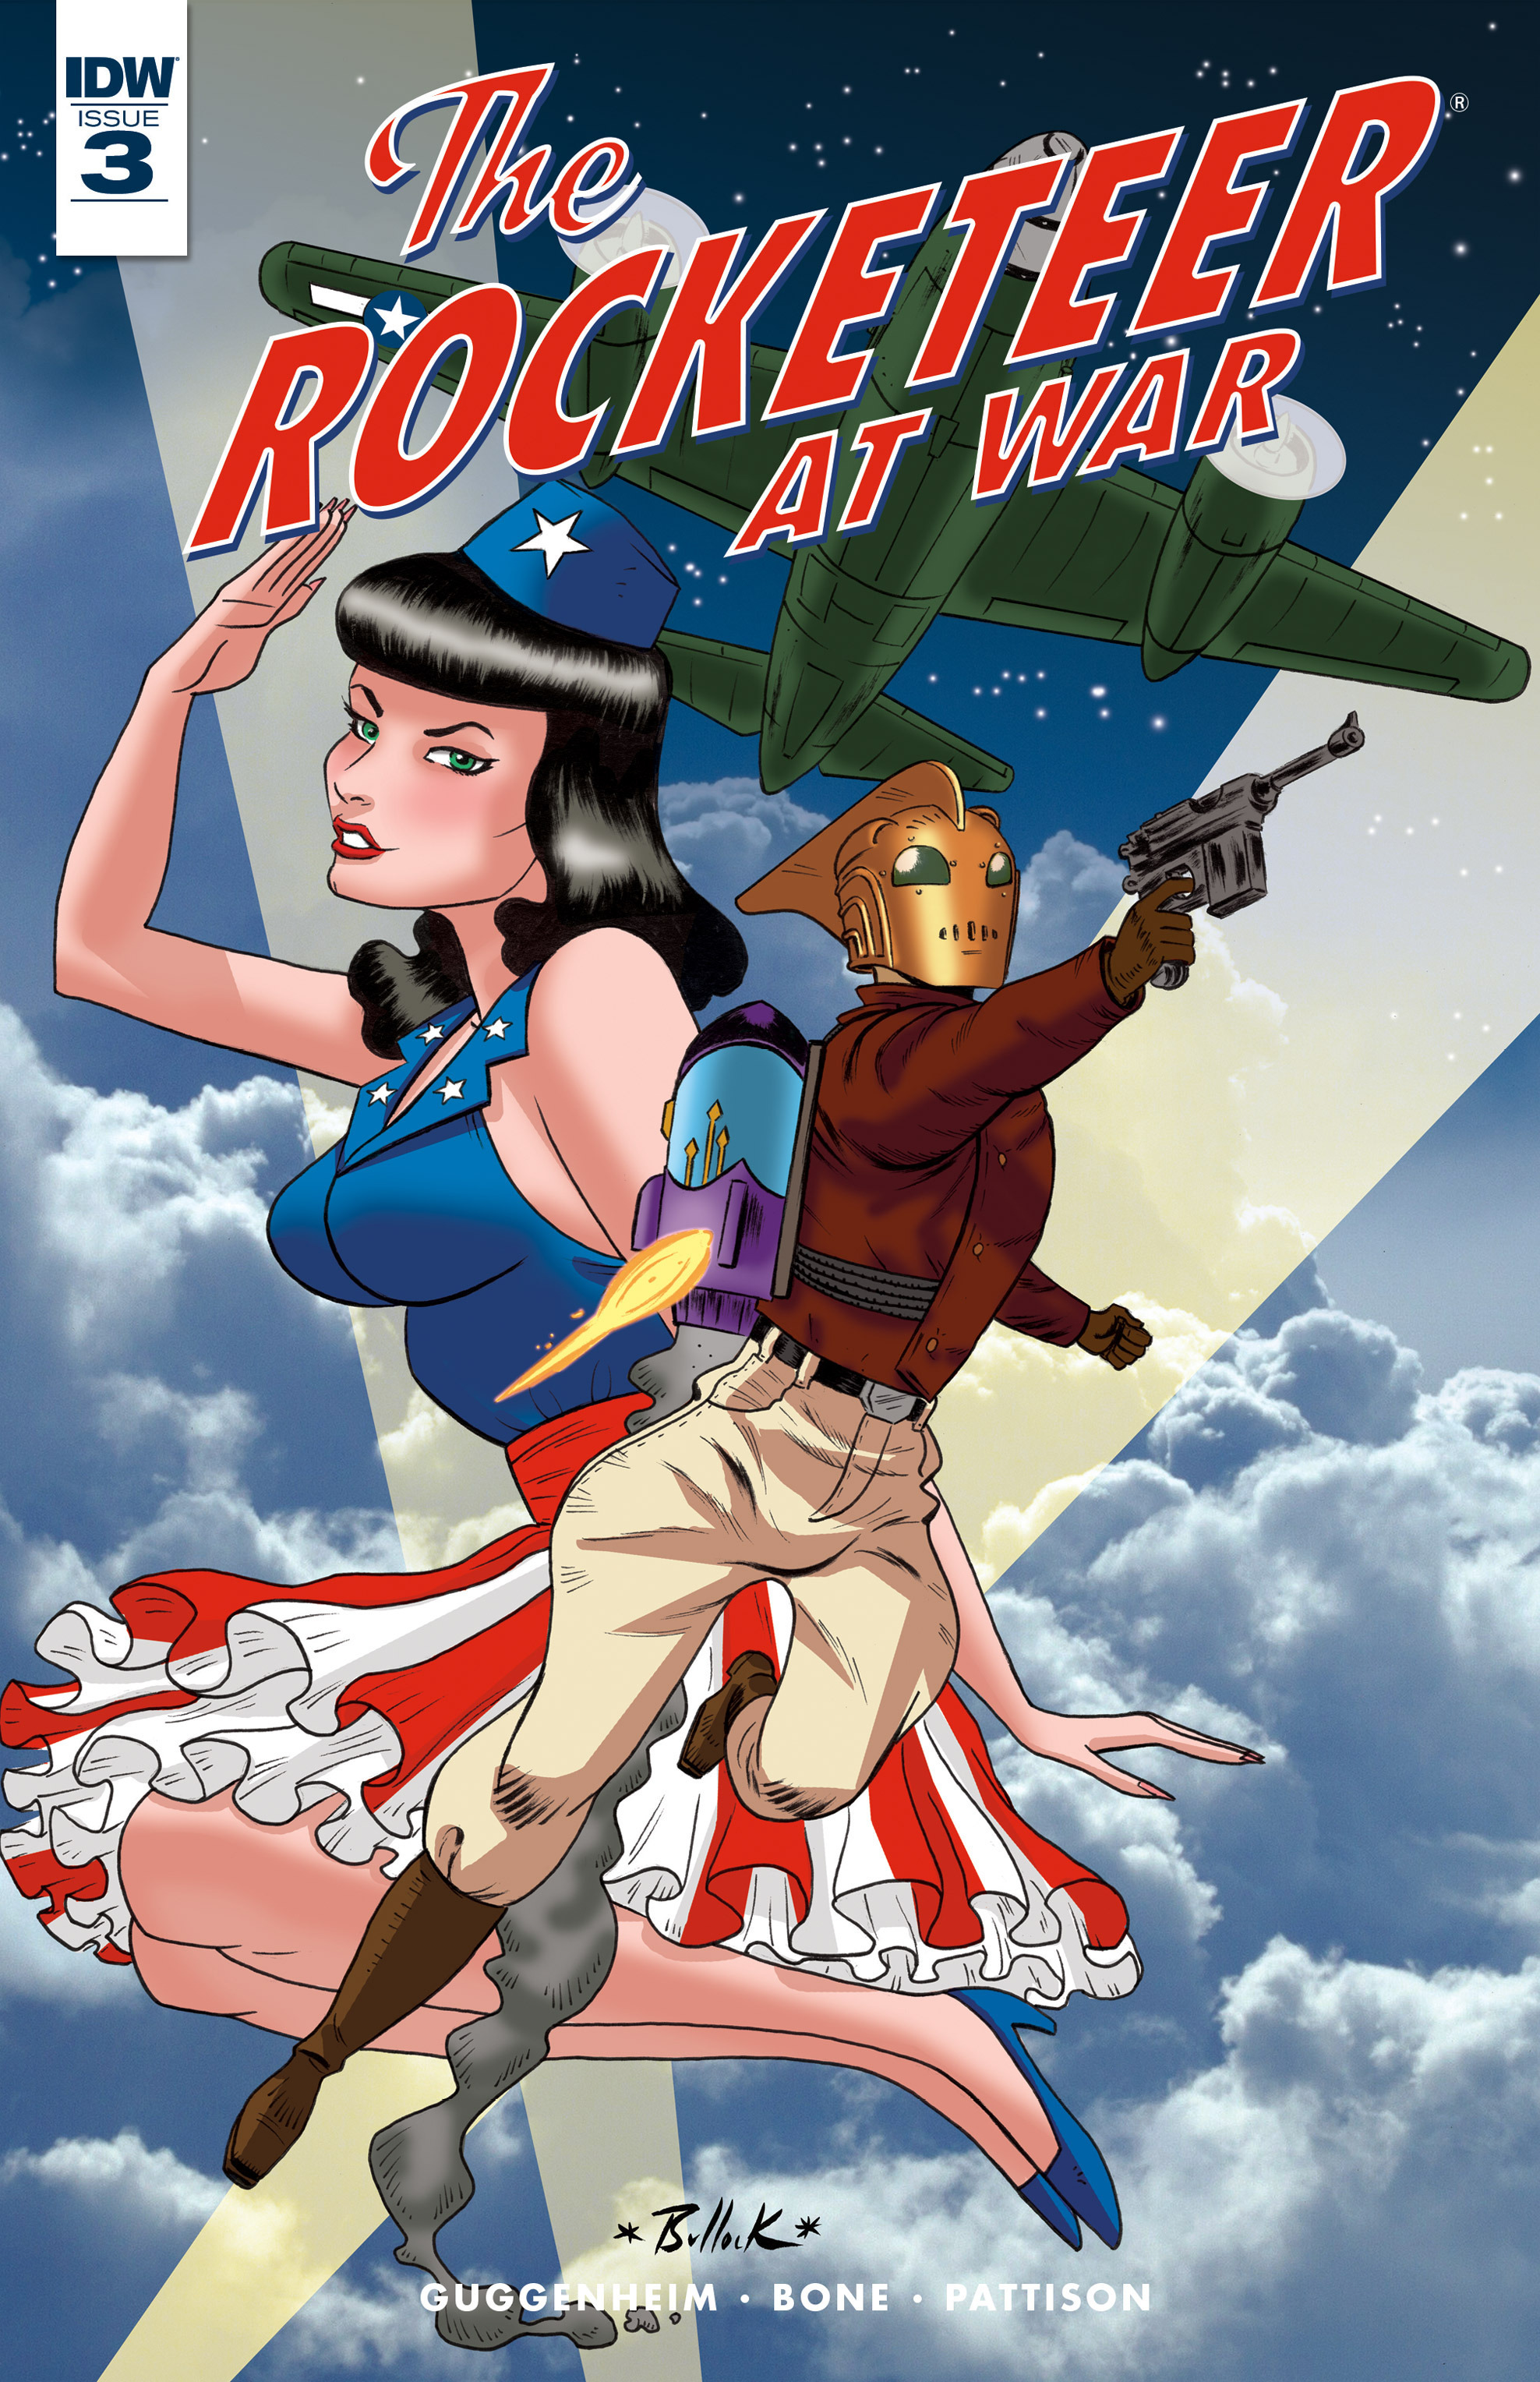 Read online The Rocketeer at War comic -  Issue #3 - 1